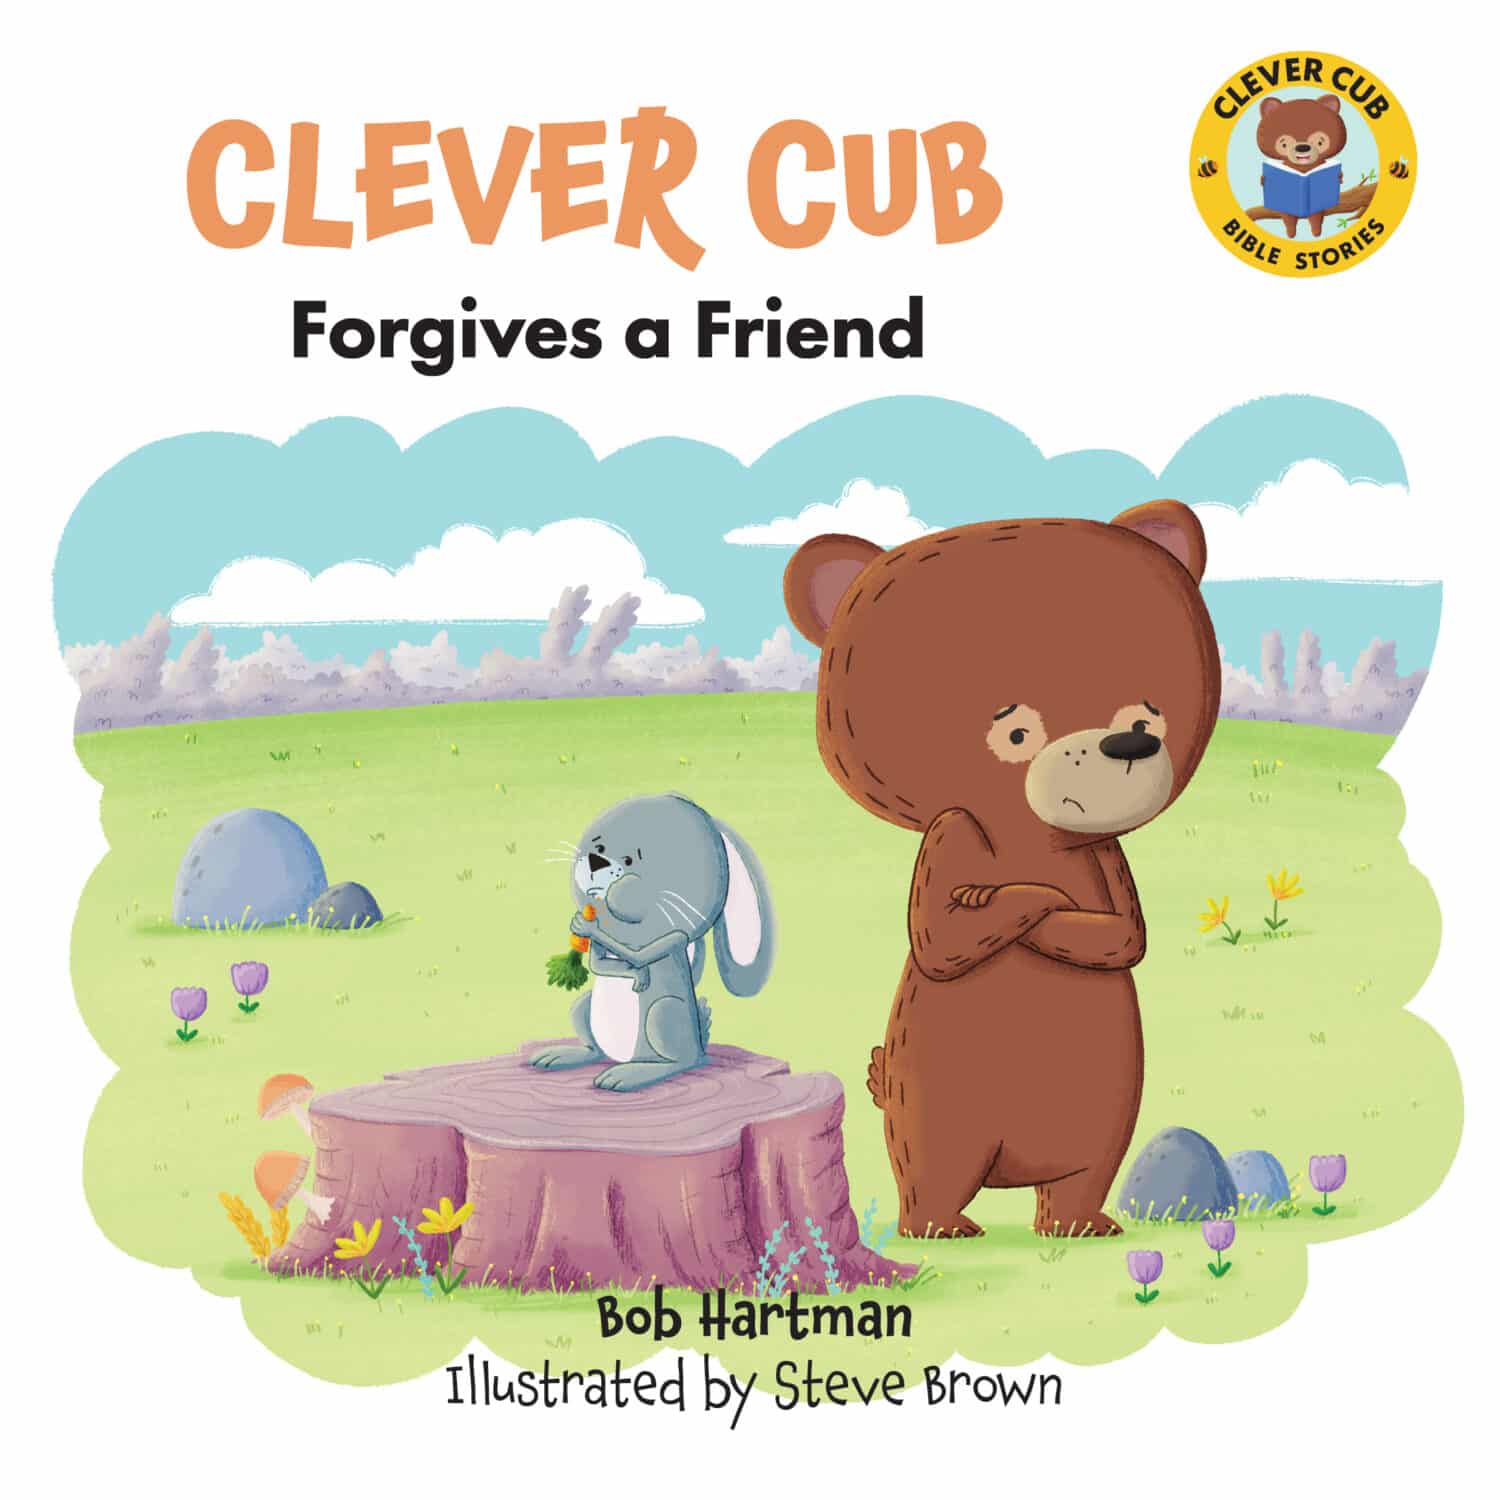 Clever Cub book cover image